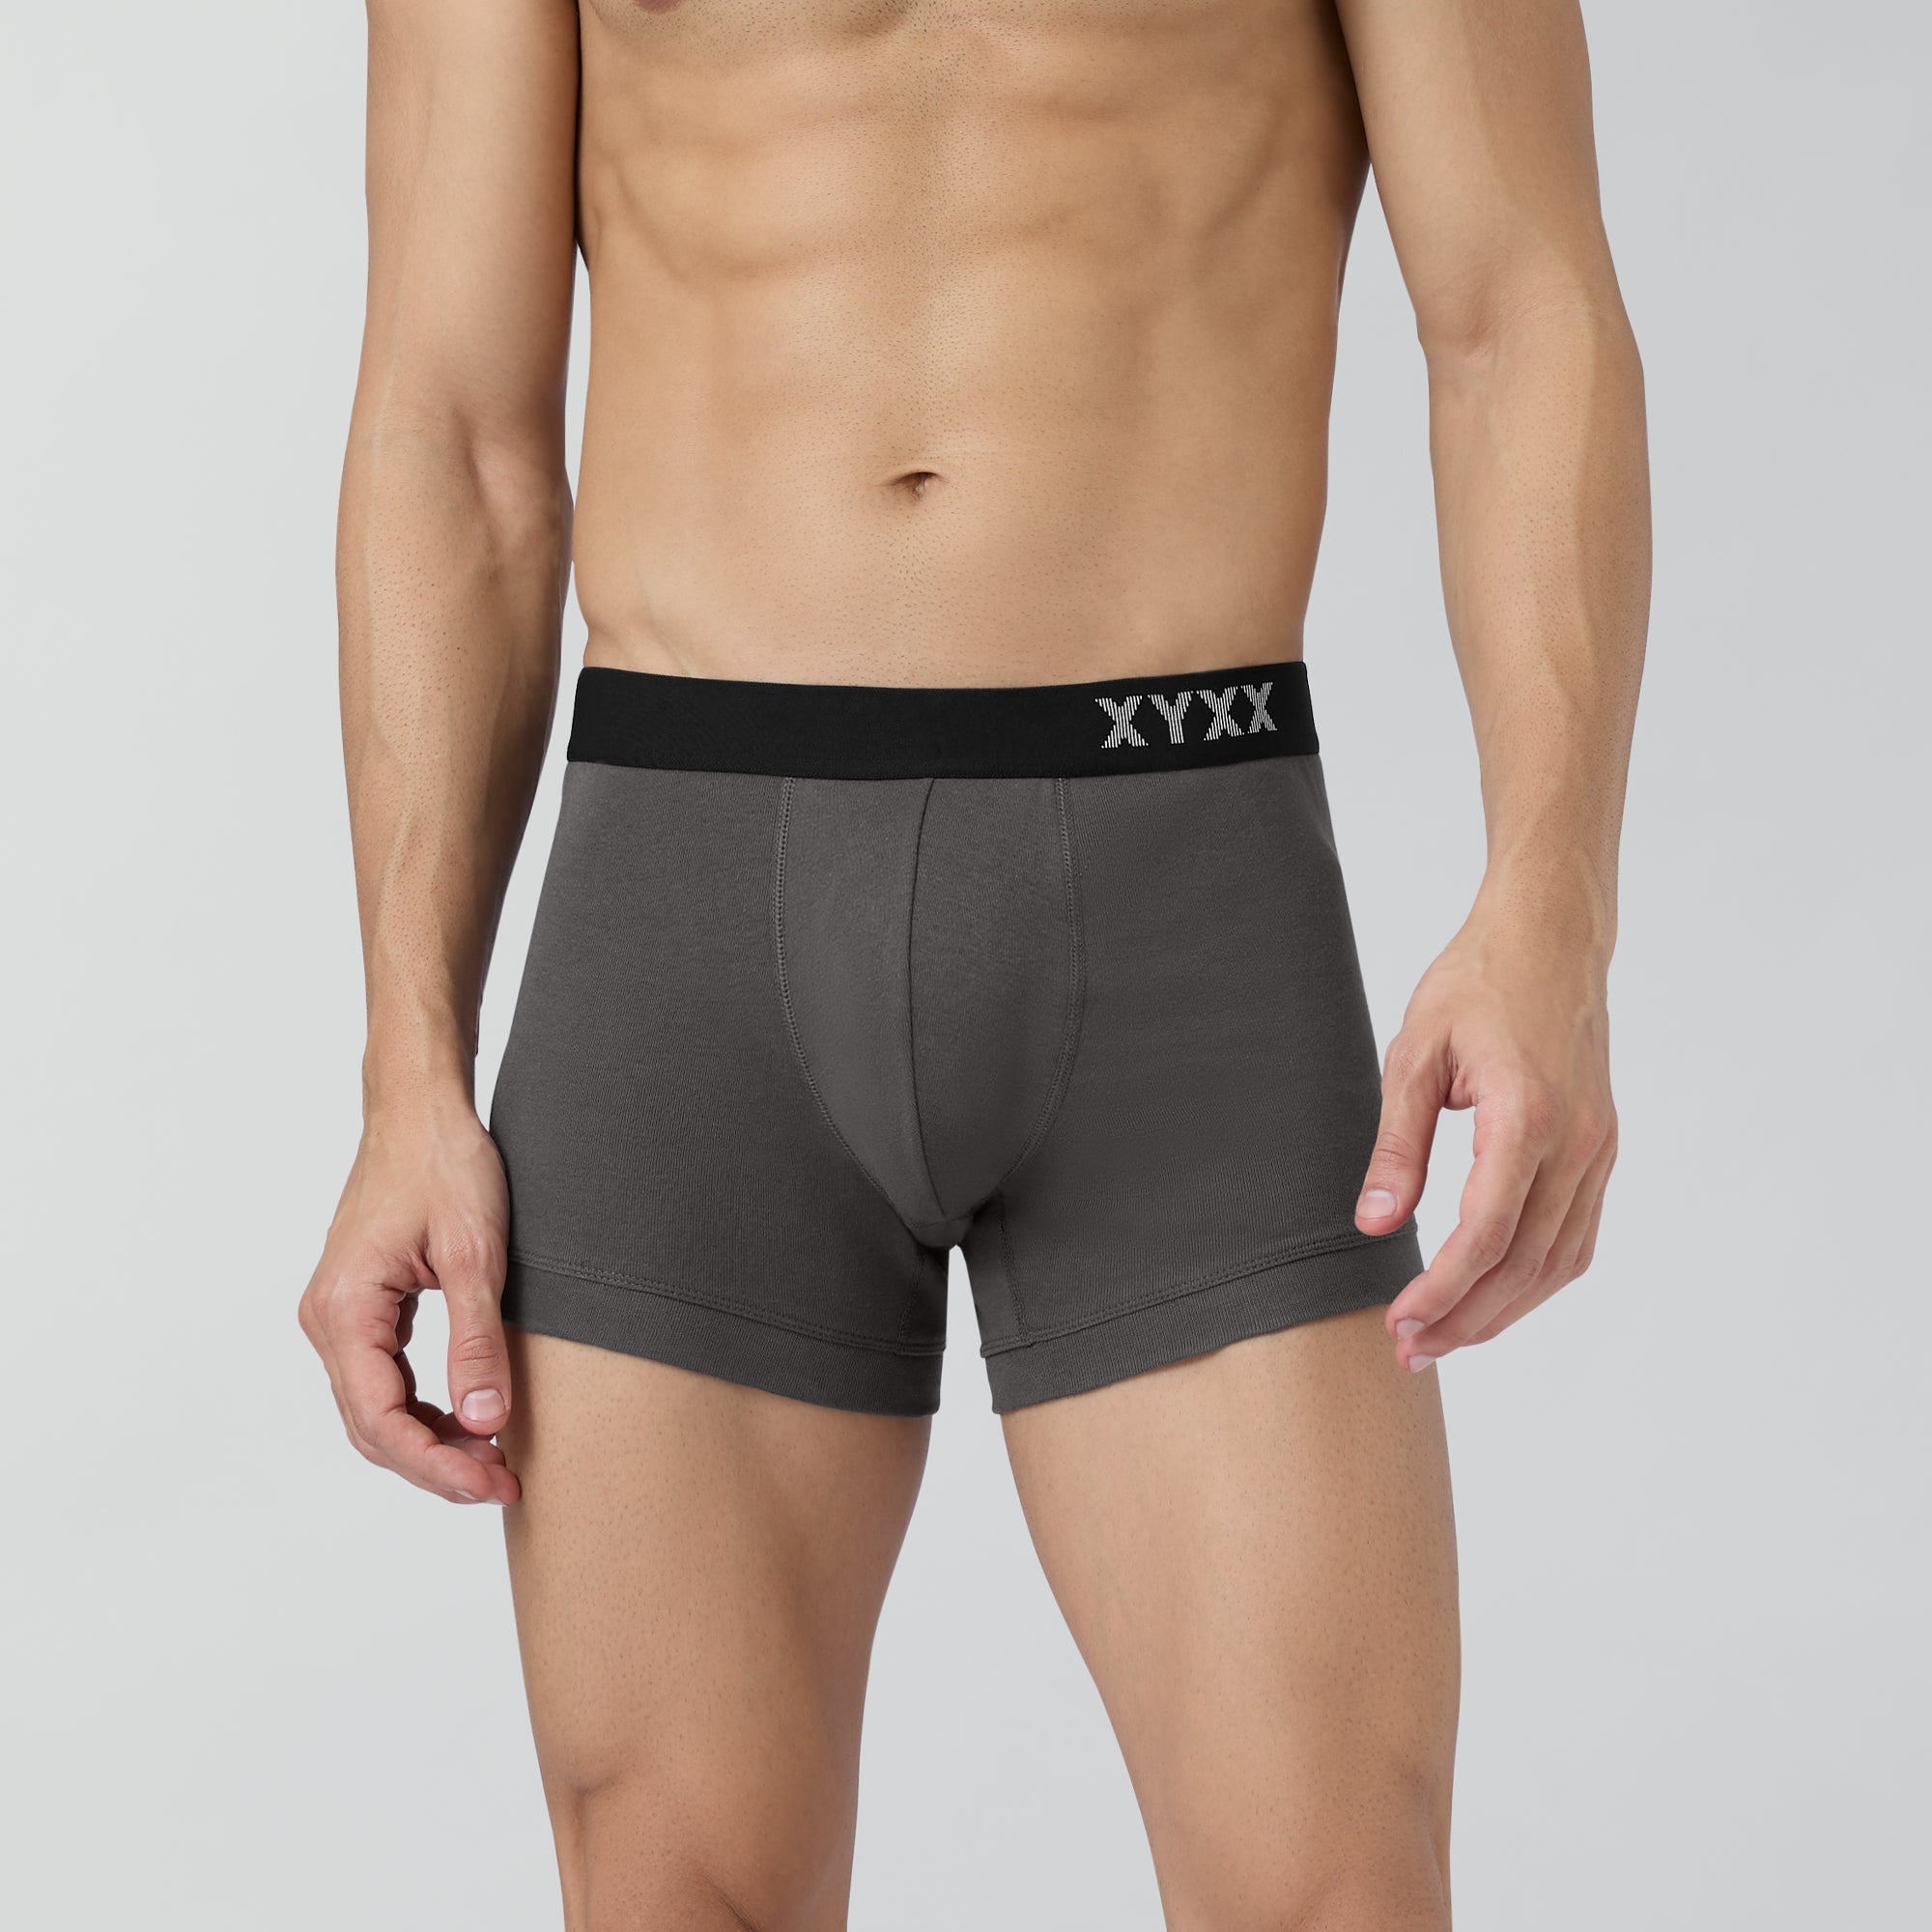 Pace Cotton Rib Briefs Charcoal Grey – XYXX Apparels